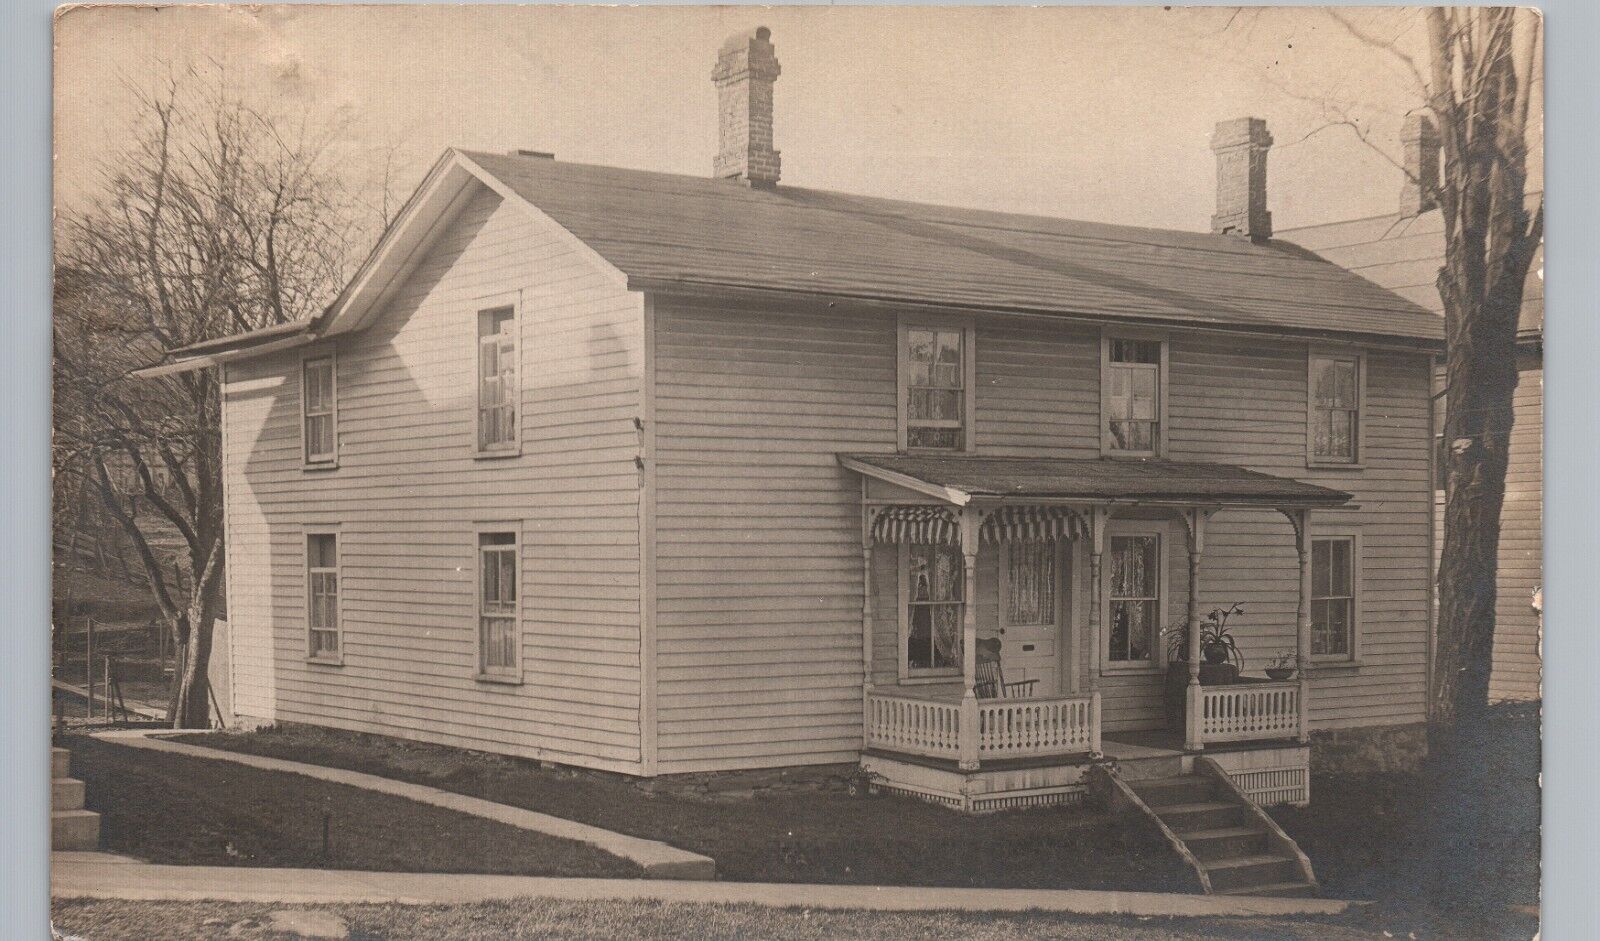 HOUSE & FRONT PORCH jamestown ny real photo postcard rppc antique history